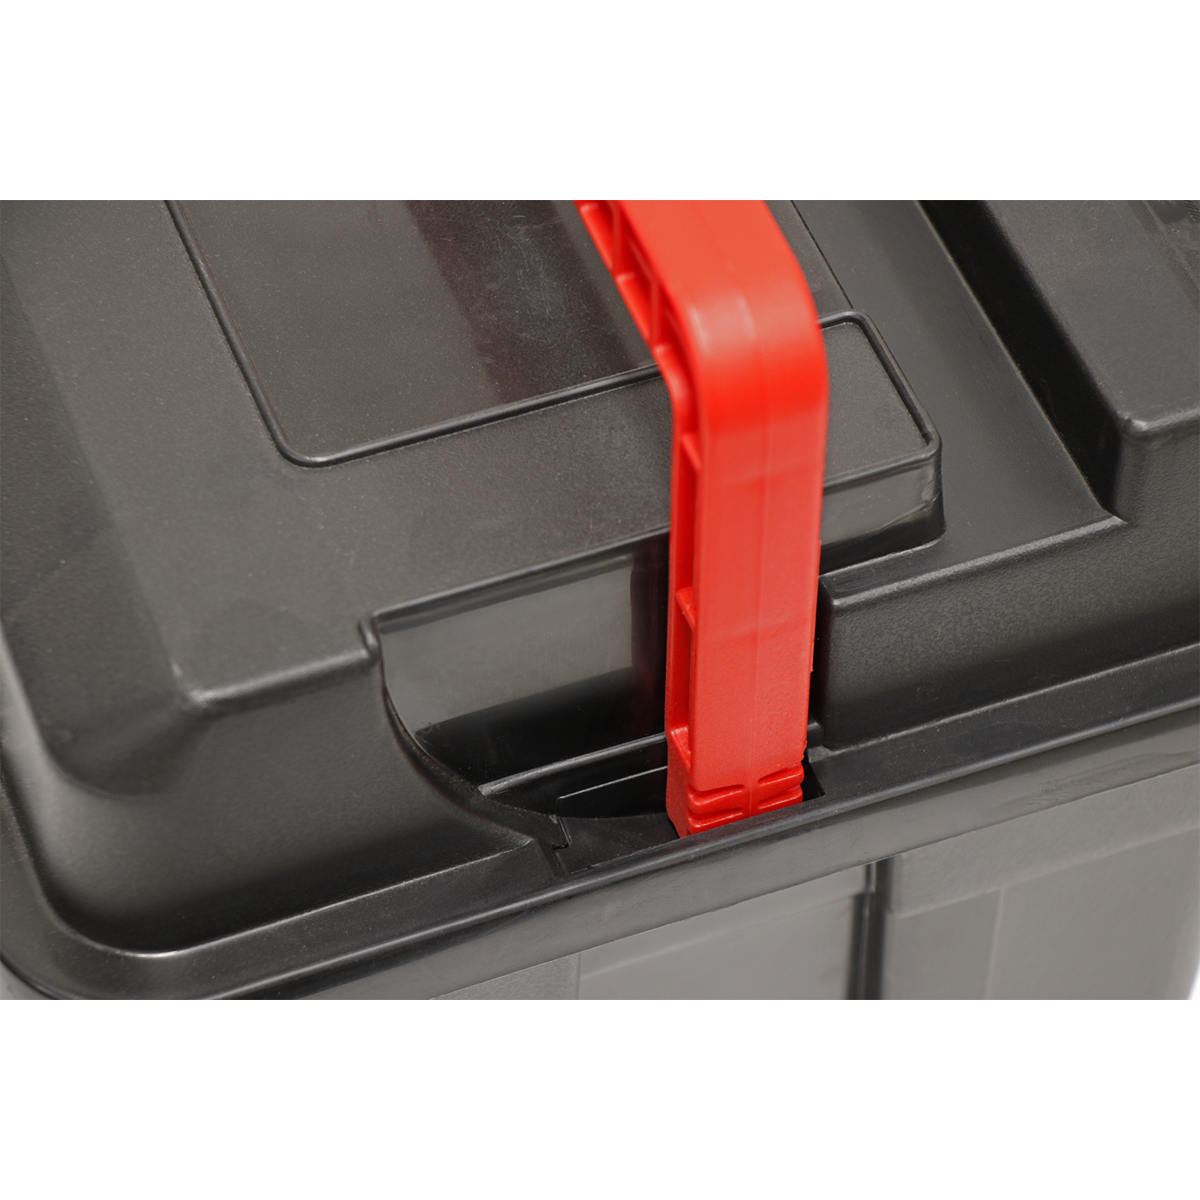 Toolbox with Locking Carry Handle 580mm - AP580LH - Farming Parts